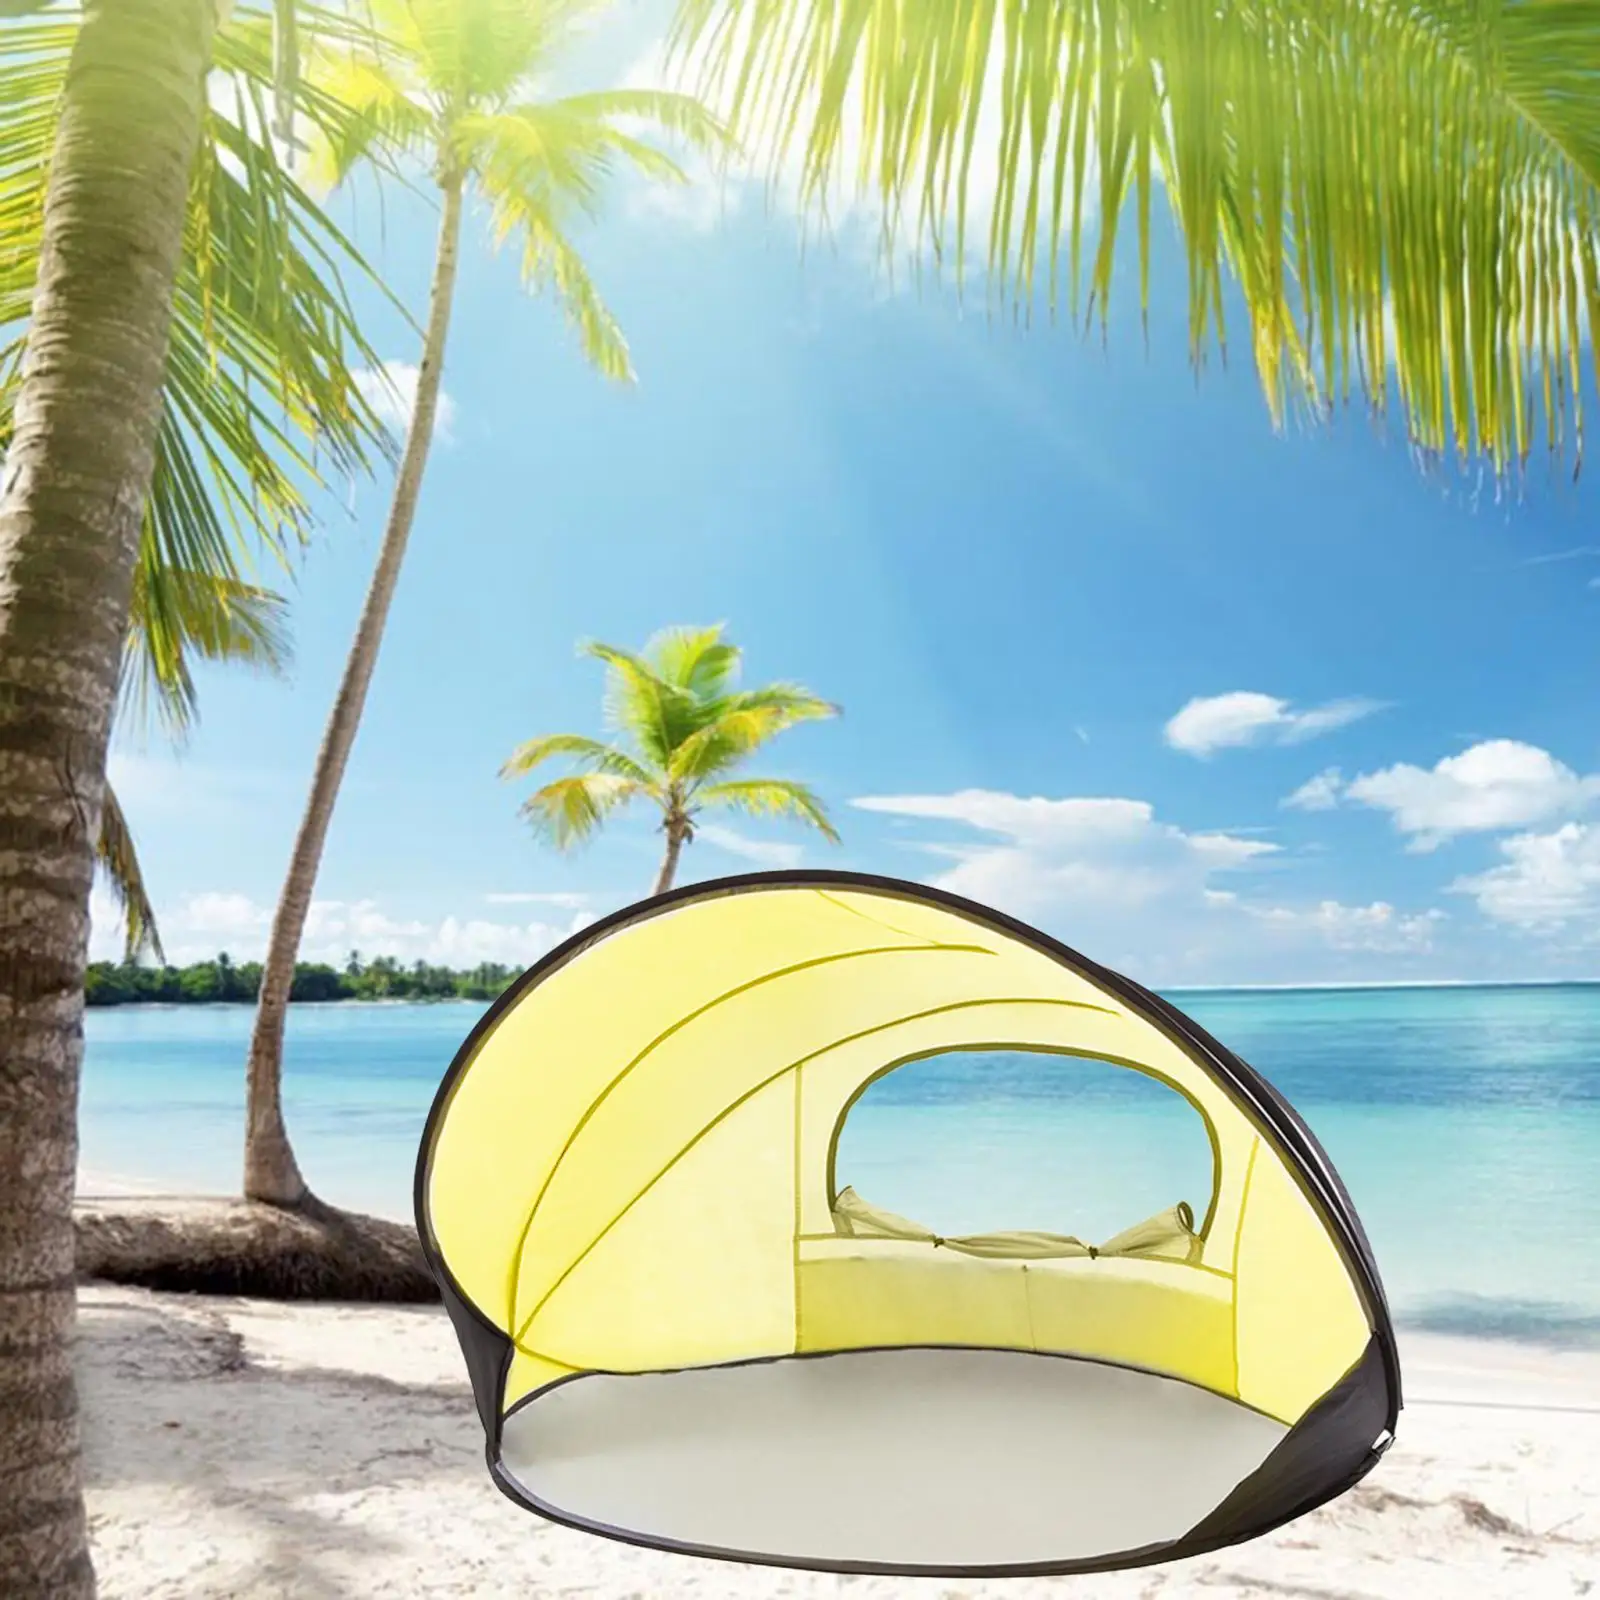 Pop up Beach Tent Sun Shelter 2 People Durable Structure for Weekend Trip Relaxing Multifunctional with Carrying Bag Waterproof